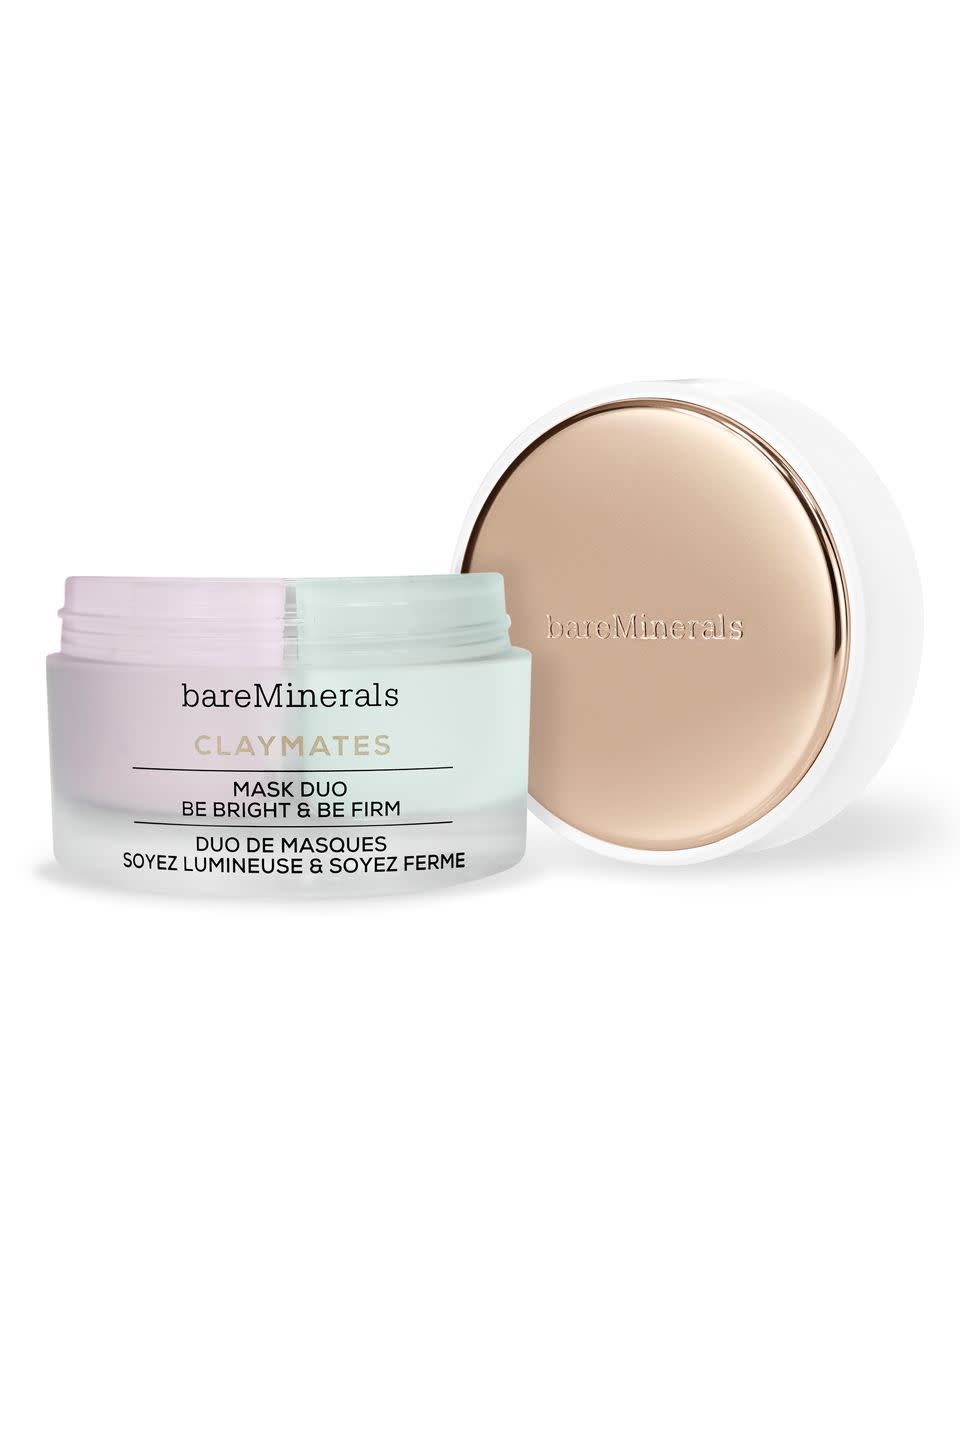 <p>Use the Be Pure side of this mask on areas of the face that need a deep cleansing — then pop the Be Dewy side onto areas that are dry or red. You'll get targeted results <em>exactly </em>where you need them.</p><p>BareMinerals Claymates Be Pure and Be Dewey Mask Duo, $35, <a href="https://www.bareminerals.com/skincare/masks/claymates-be-pure-%26-be-dewy-mask-duo/US86007.html" rel="nofollow noopener" target="_blank" data-ylk="slk:bareminerals.com" class="link ">bareminerals.com</a></p>